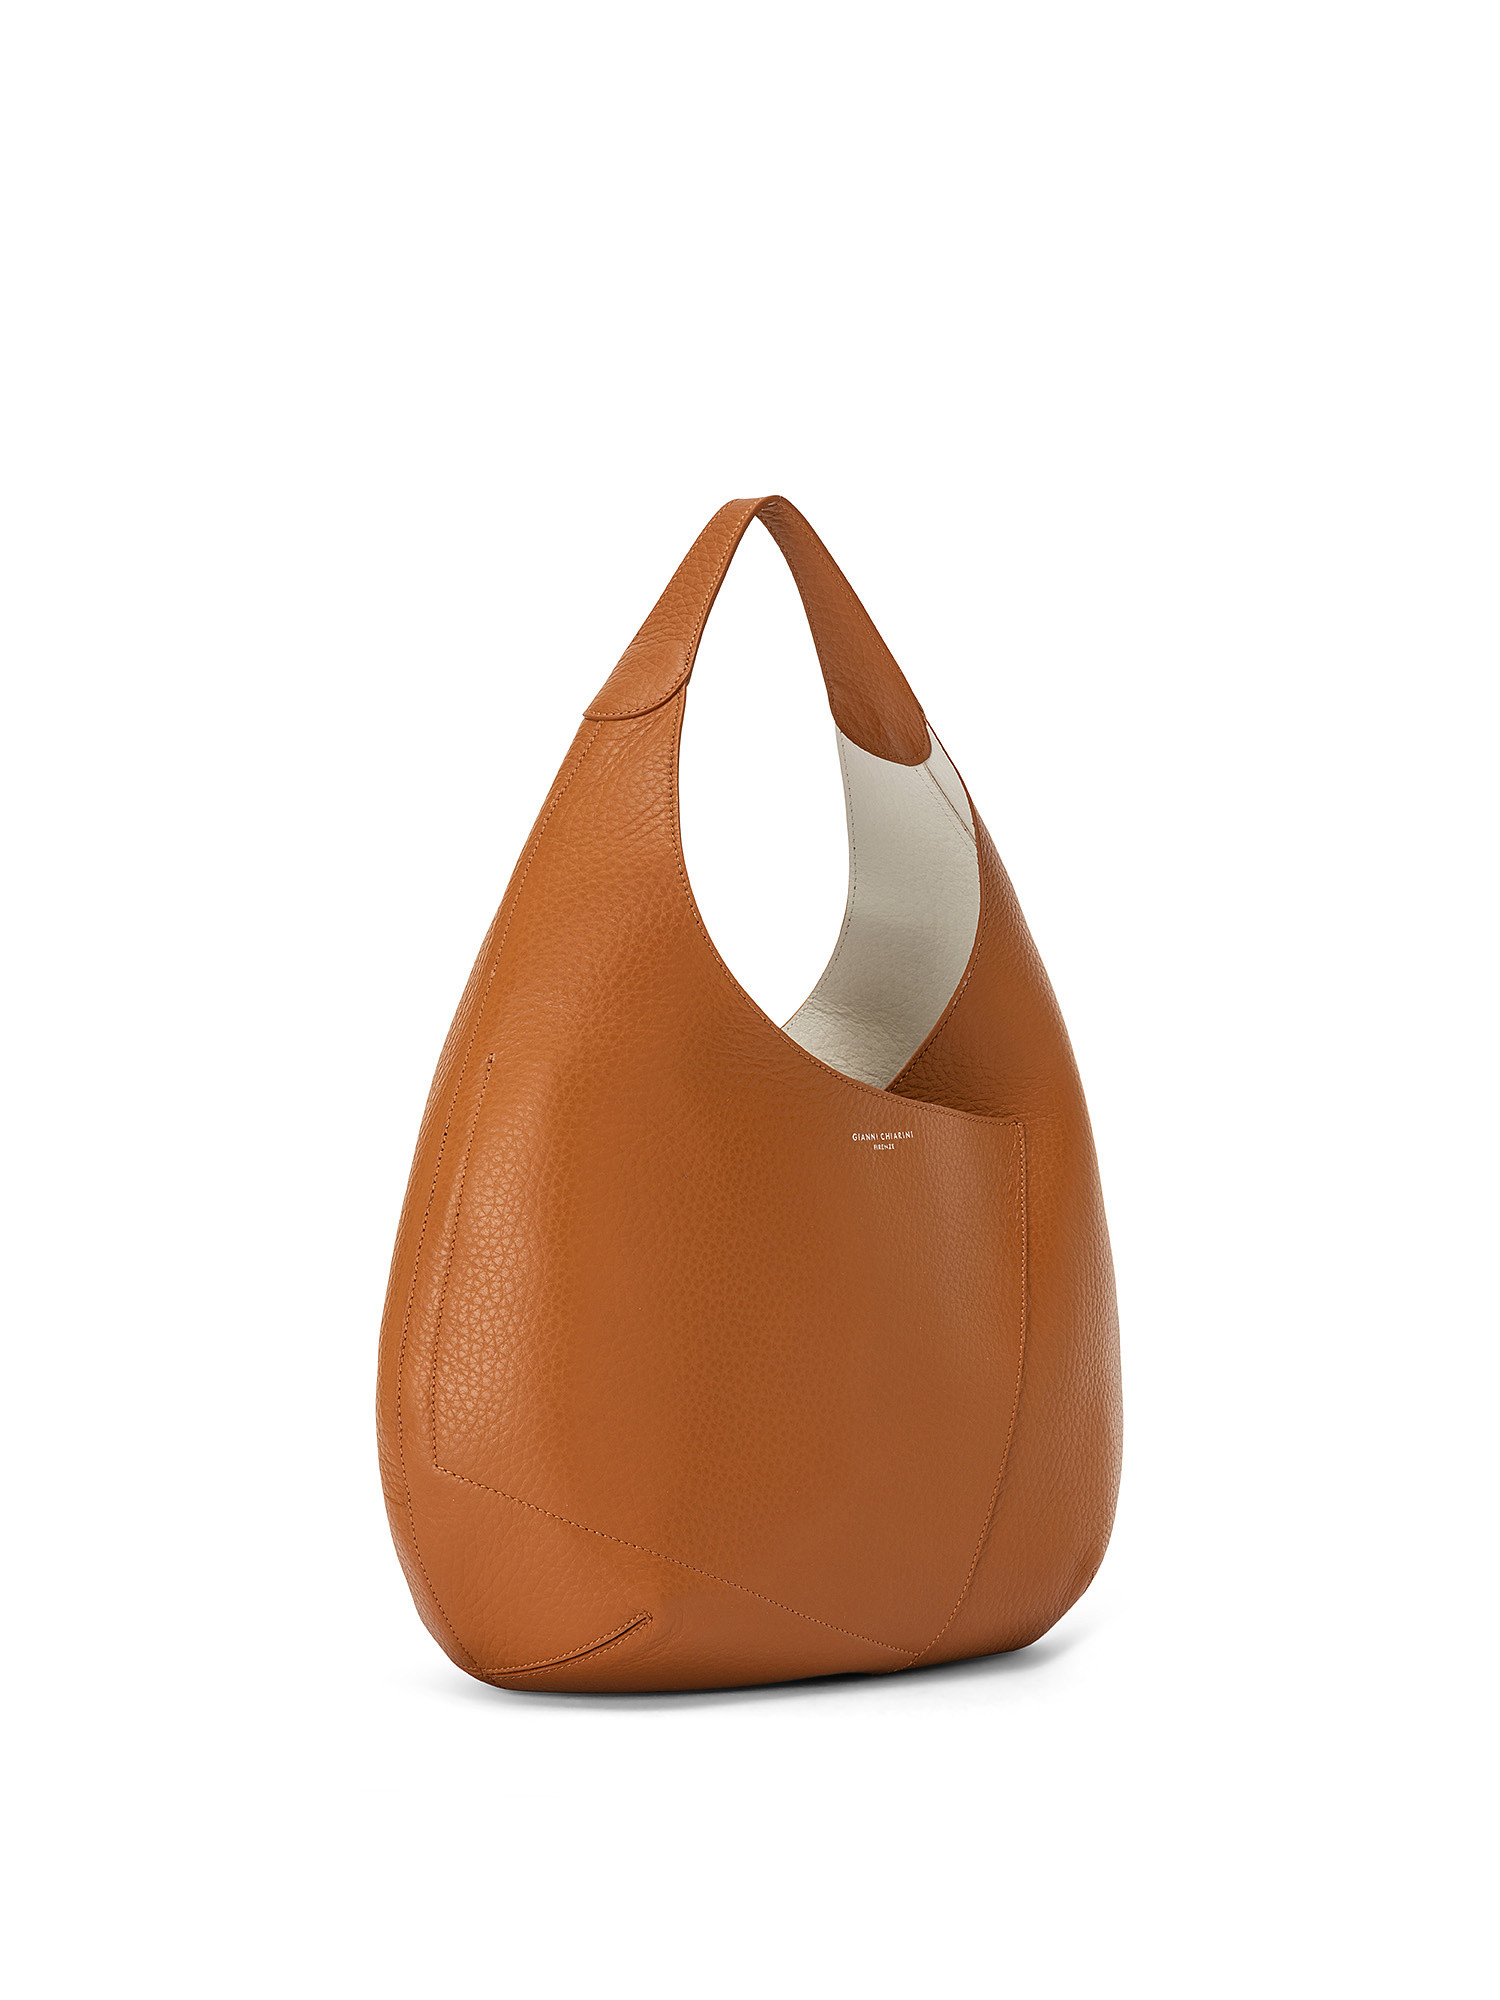 Euphoria leather bag, Leather Brown, large image number 1